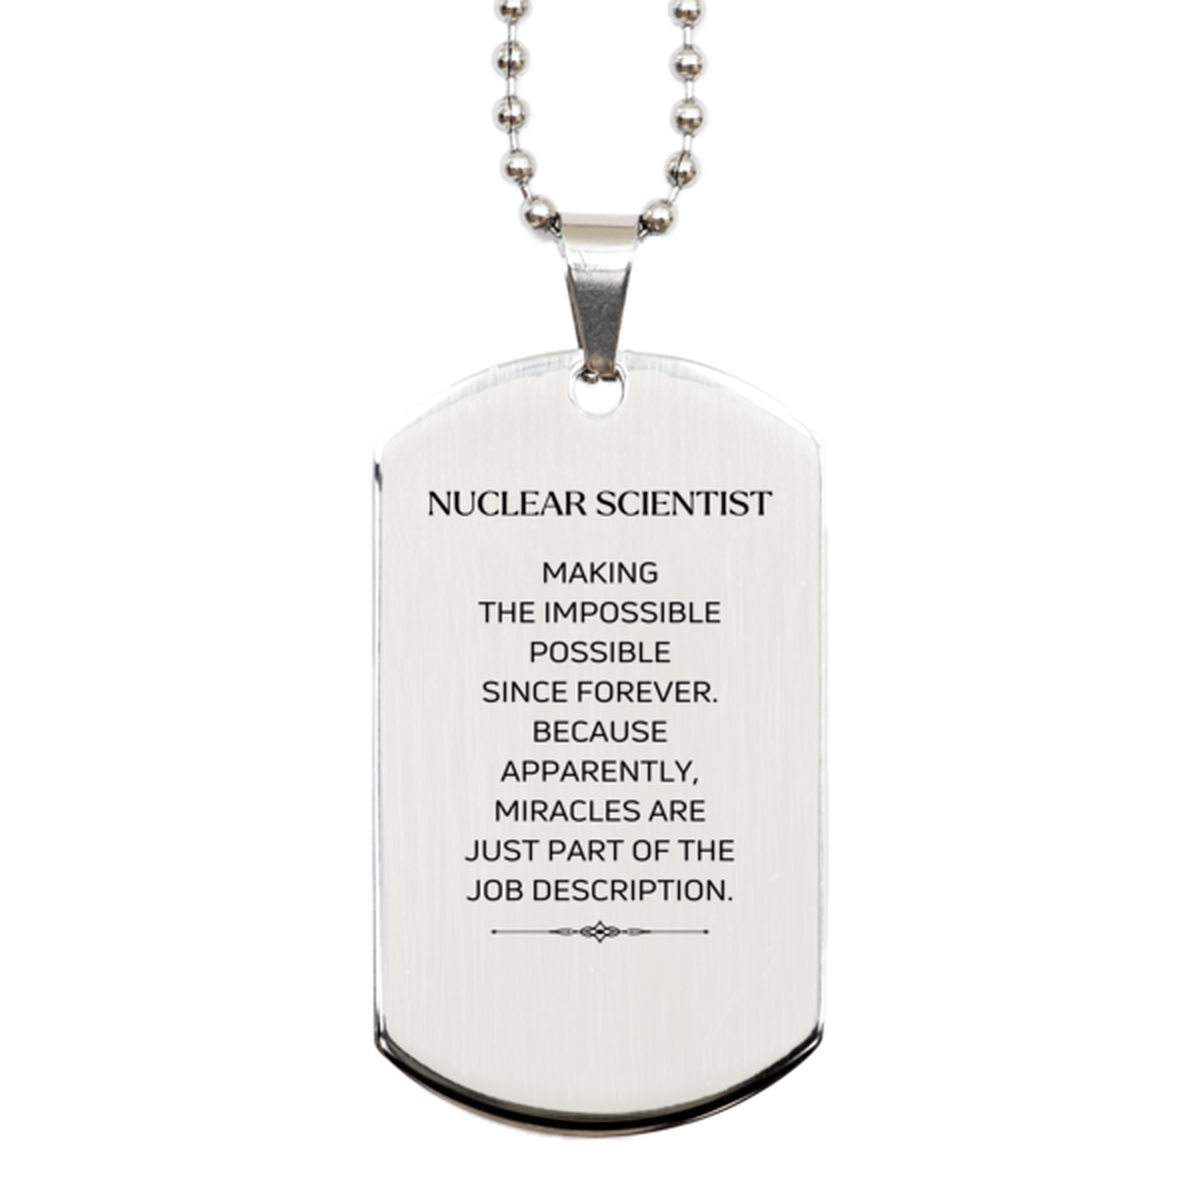 Funny Nuclear Scientist Gifts, Miracles are just part of the job description, Inspirational Birthday Silver Dog Tag For Nuclear Scientist, Men, Women, Coworkers, Friends, Boss